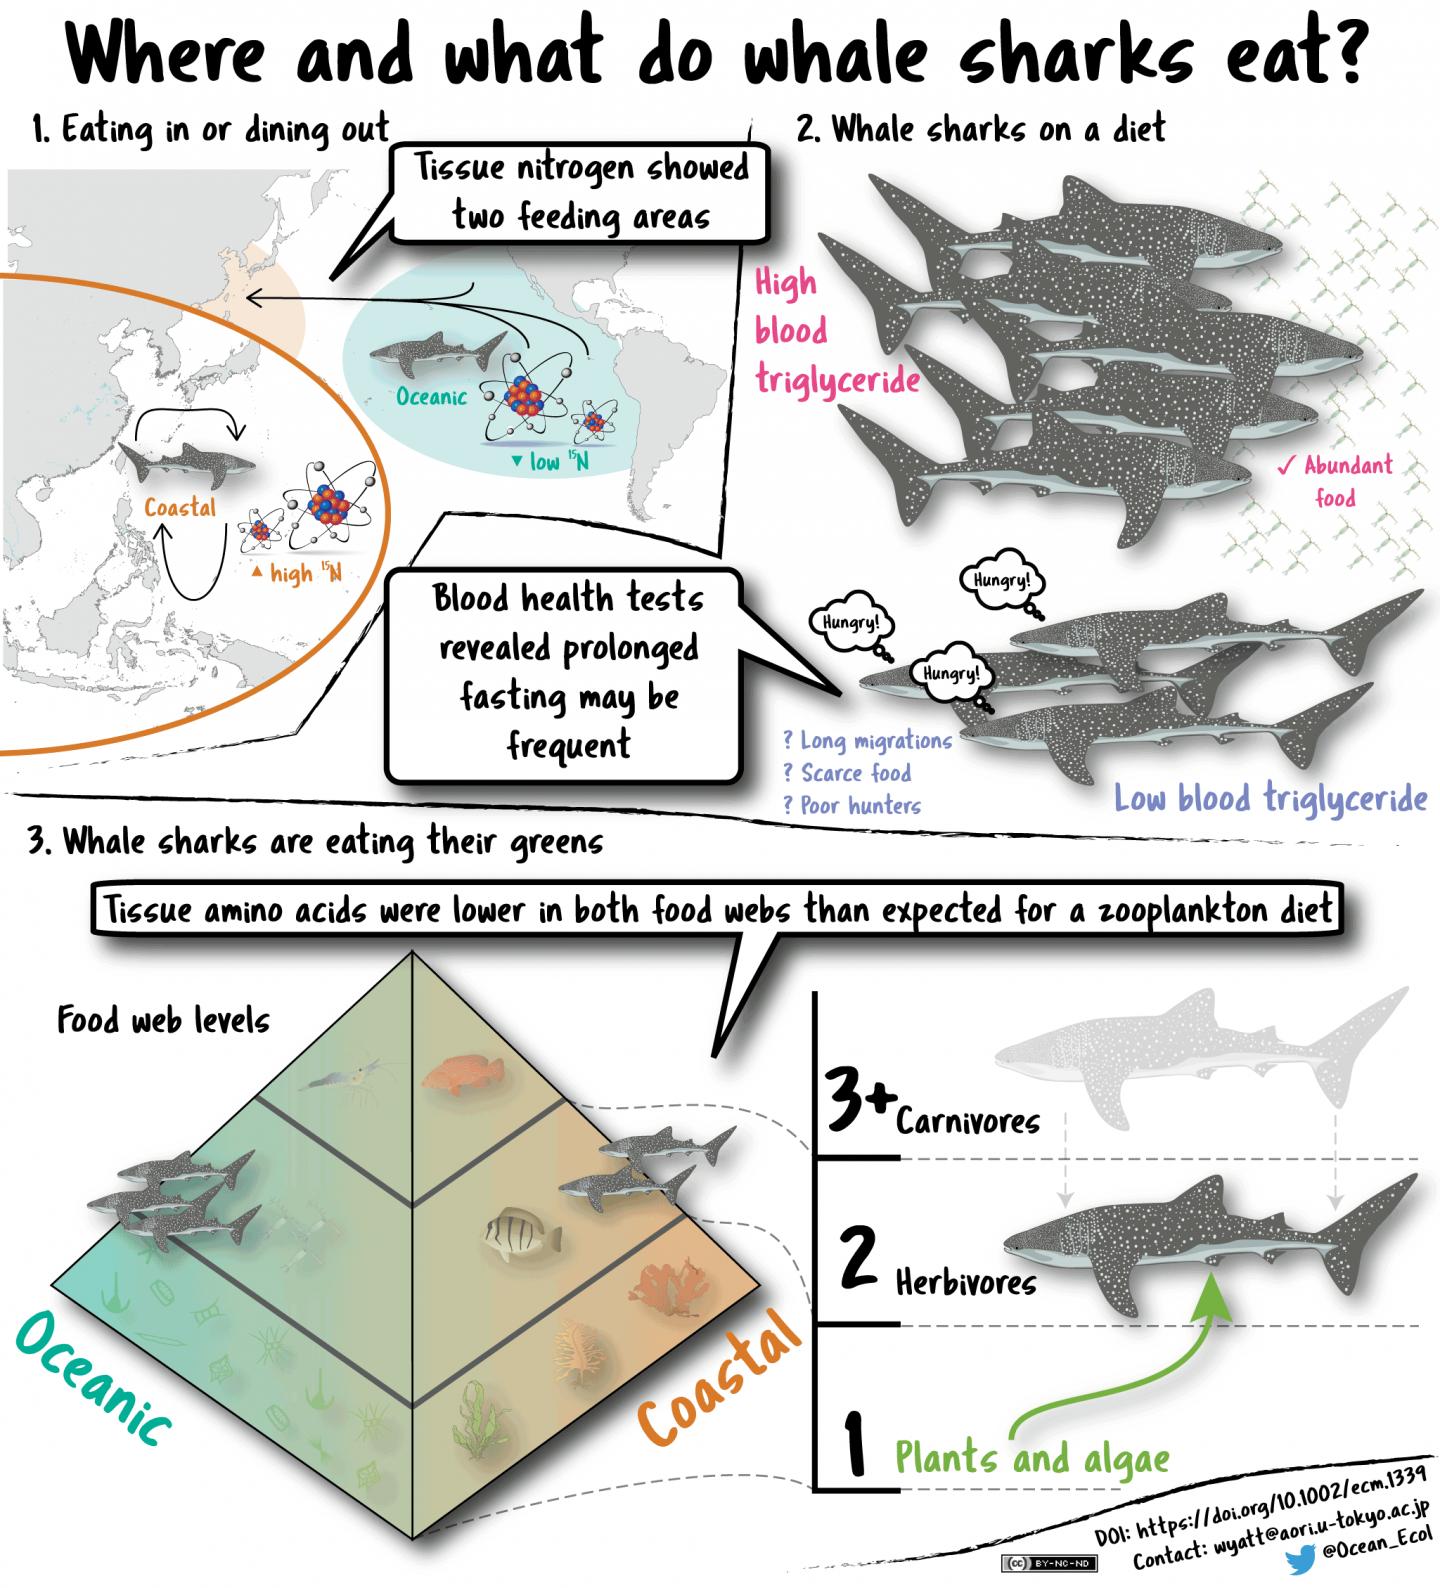 Cartoon Showing Whale Shark Migration Maps and Diet Graphs